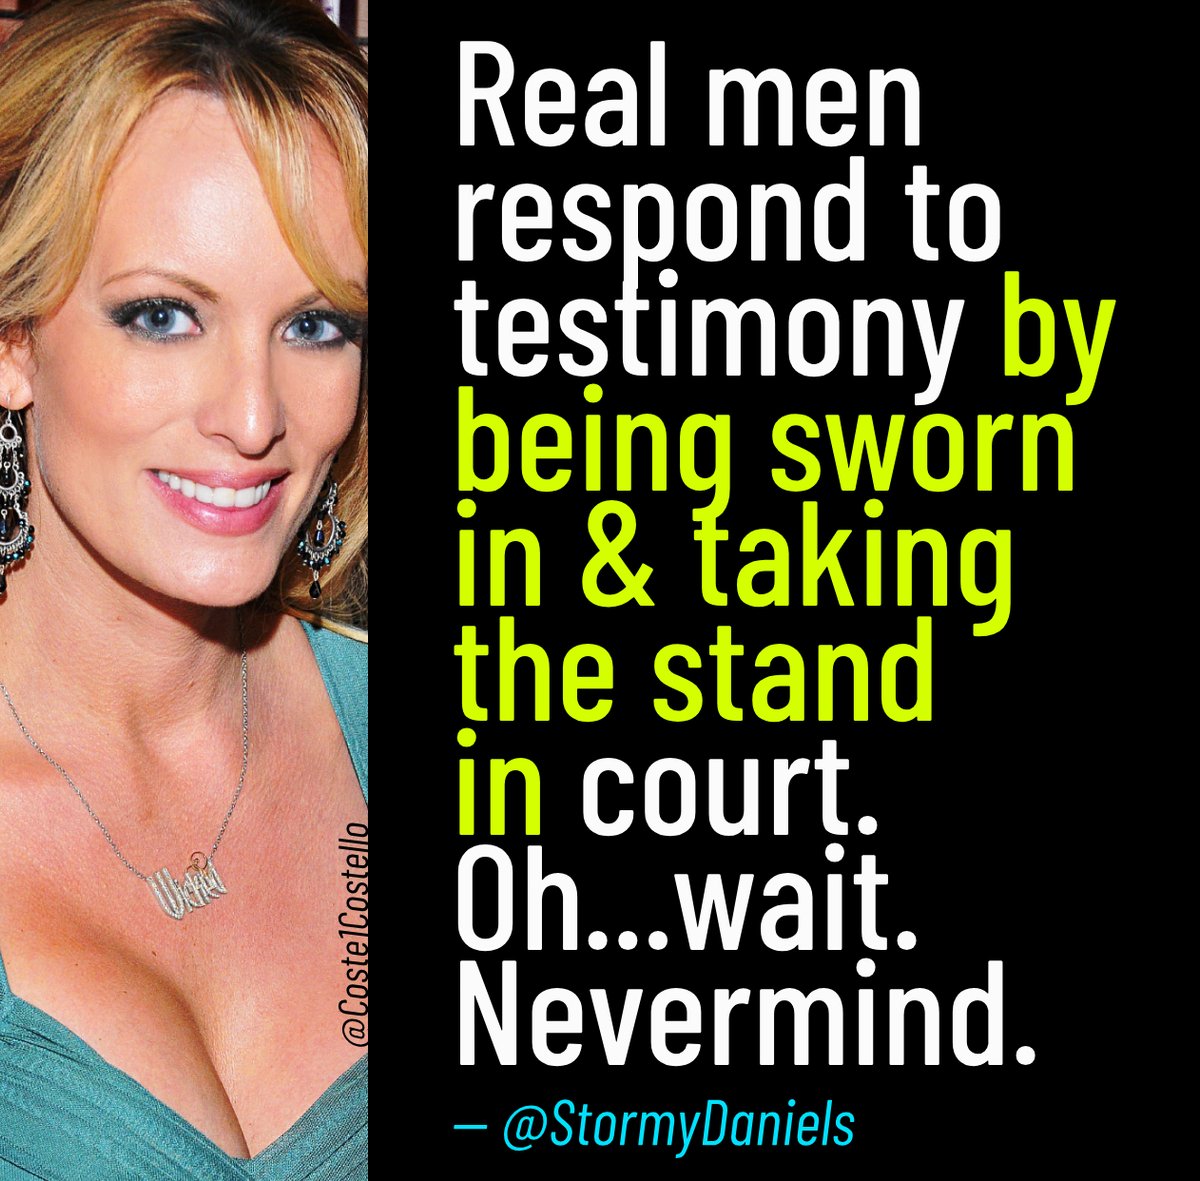 🟥🟥🟥 BREAKING After completing her testimony this week, @StormyDaniels just dropped a BURN of a tweet directed at TRUMP the coward. So, I made this meme for y'all to spread around for many years to come😃